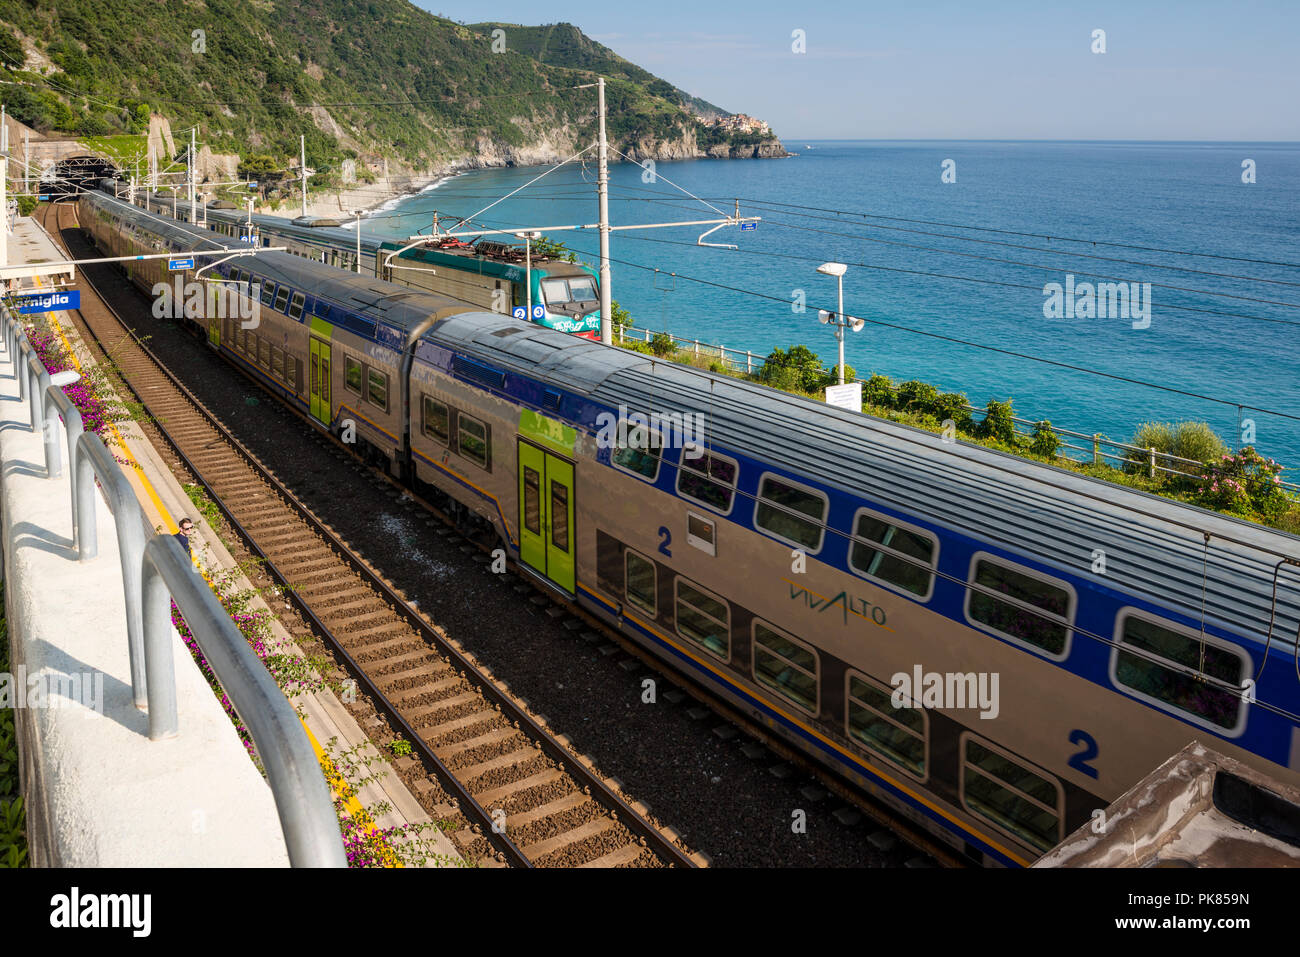 Corniglia Train Station.  Train service between La Spezia and Levanto.  The train is the easiest way to see Cinque Terre as they stop in all 5 village Stock Photo